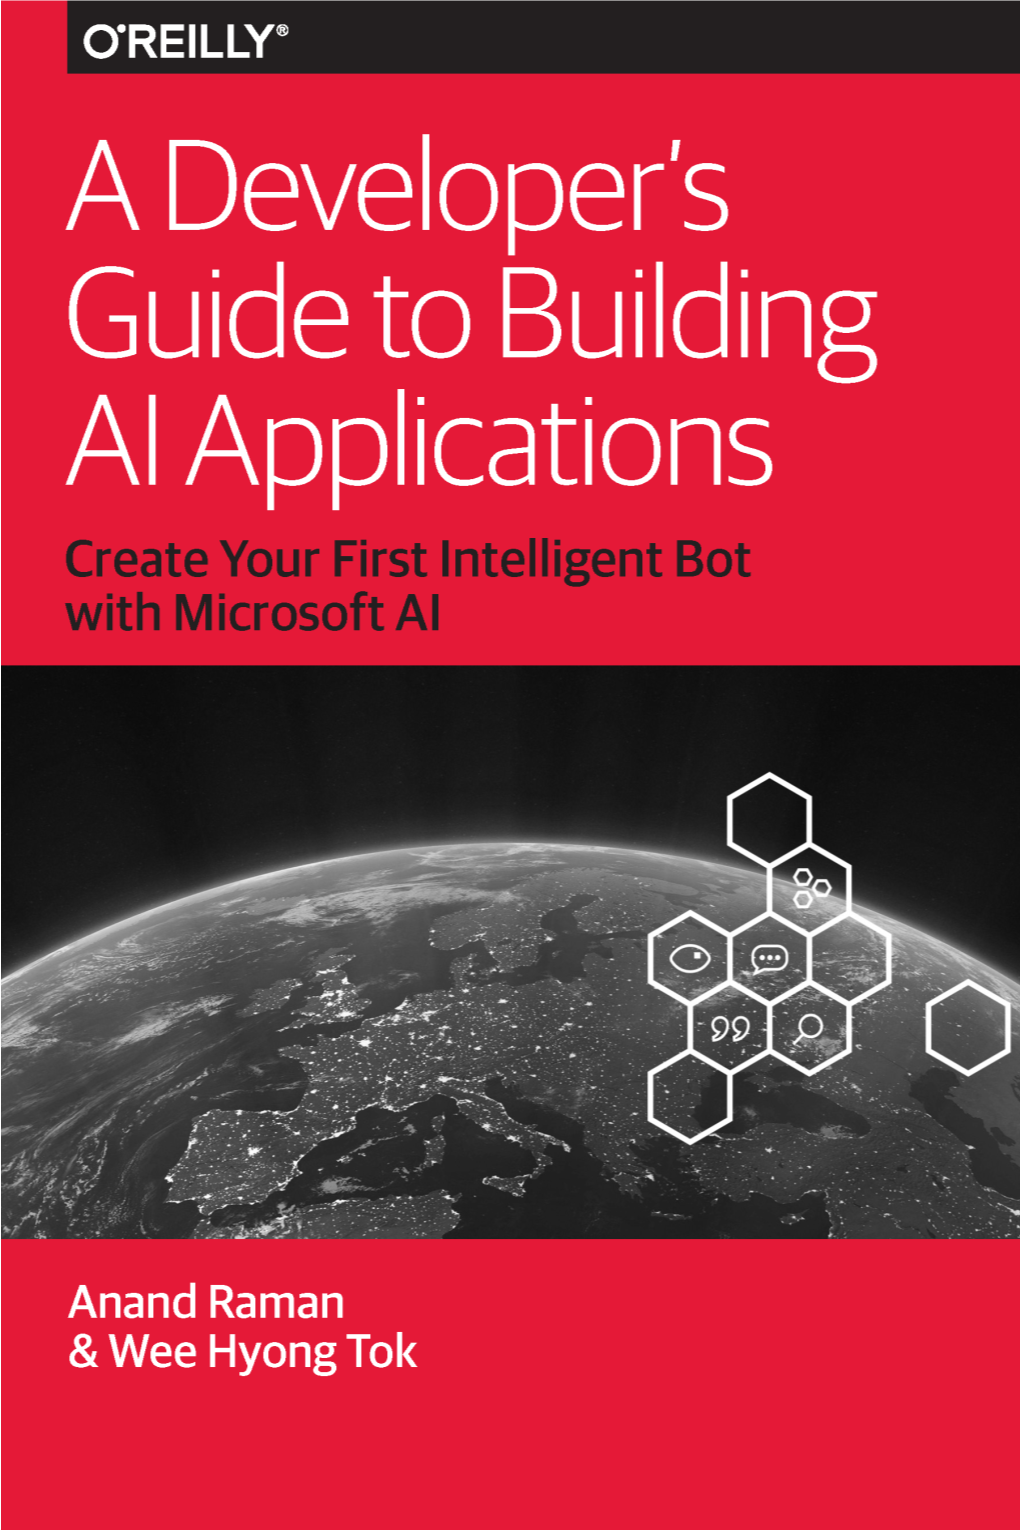 A Developer's Guide to Building AI Applications